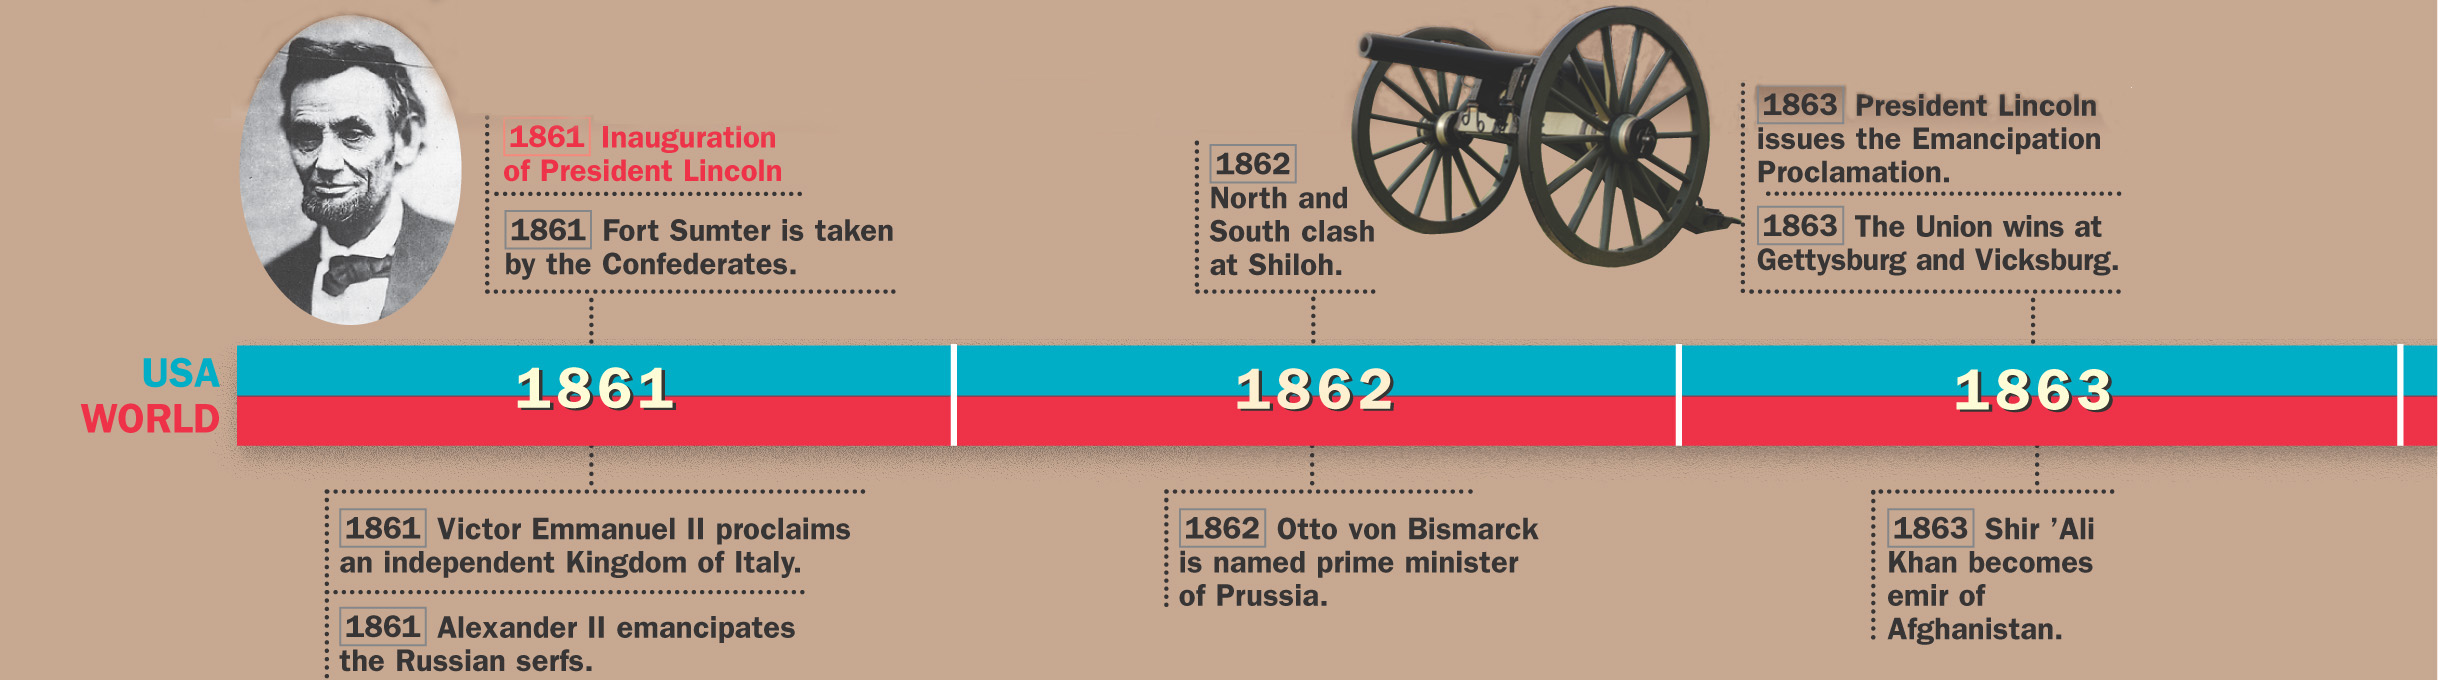 A timeline of historical events from 1861 to 1865 in both the U.S. and the world